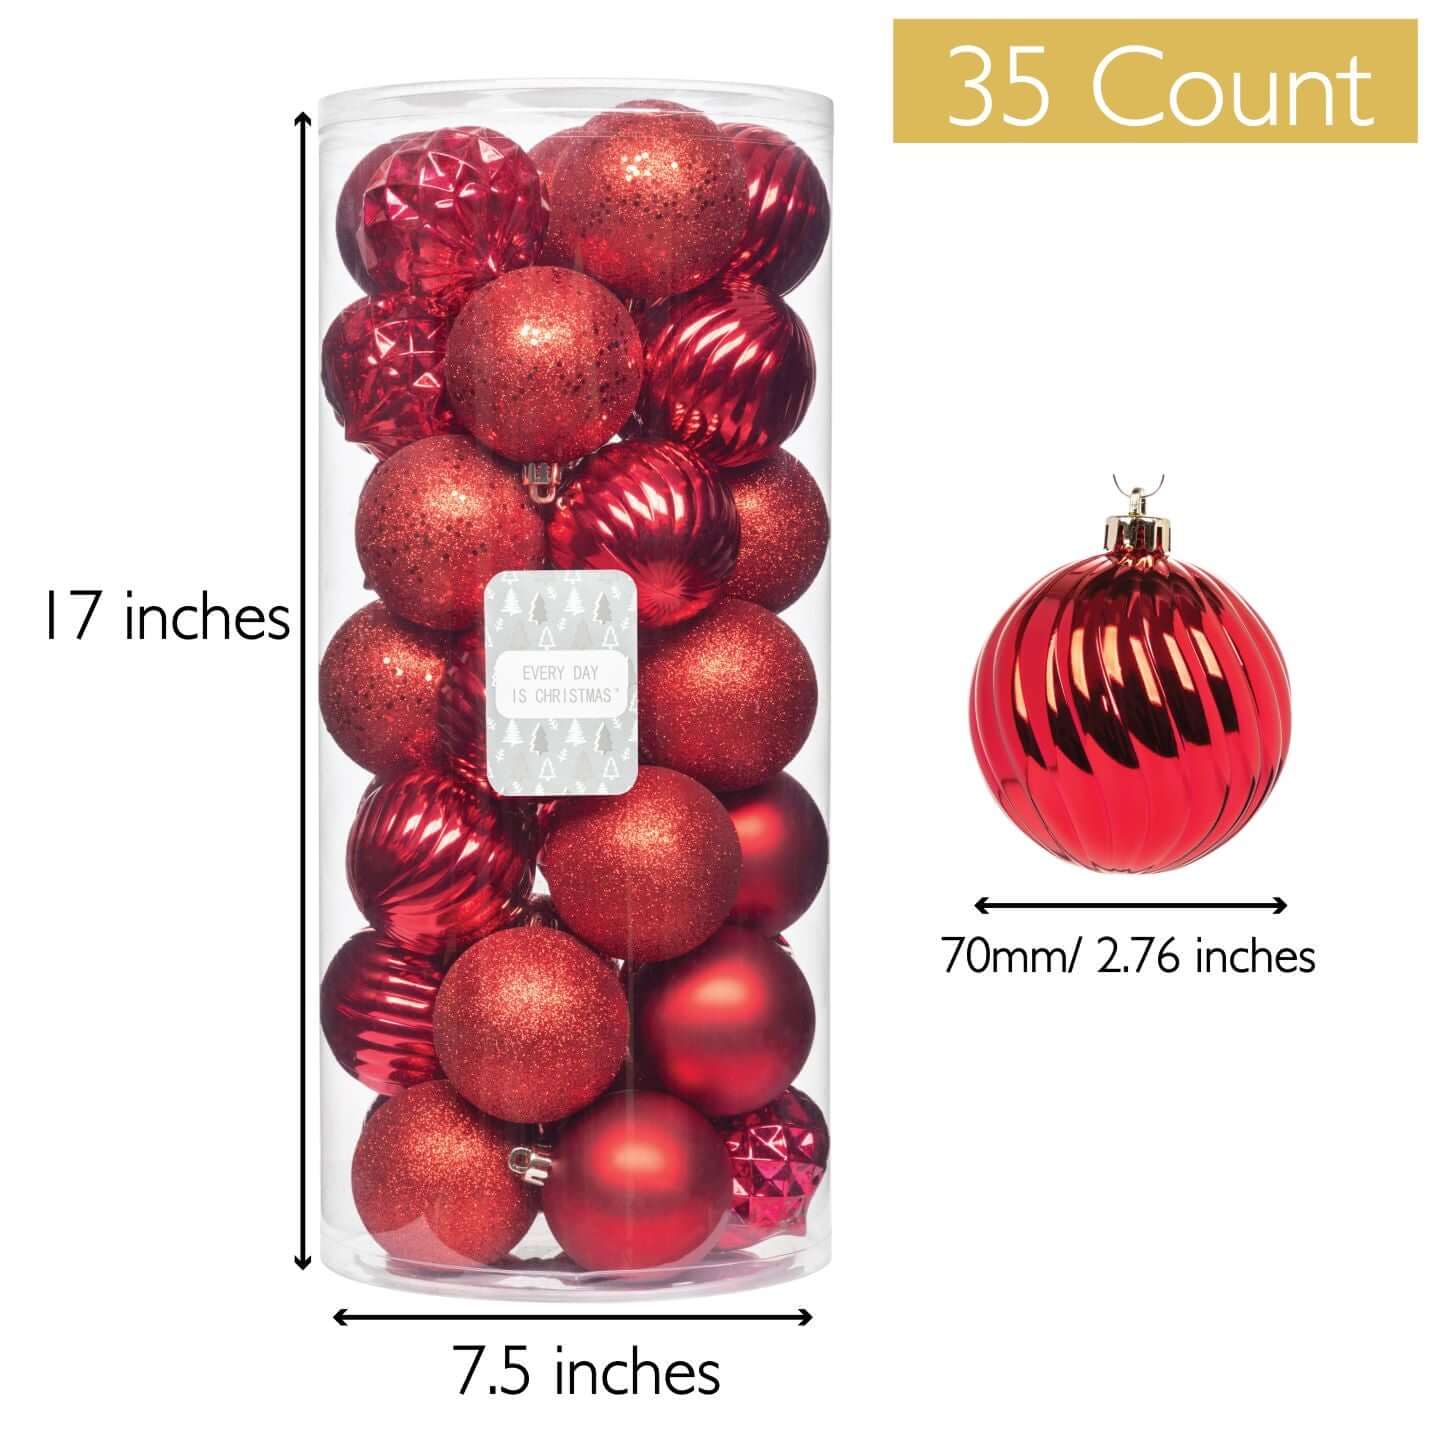 Products – Every Day is Christmas